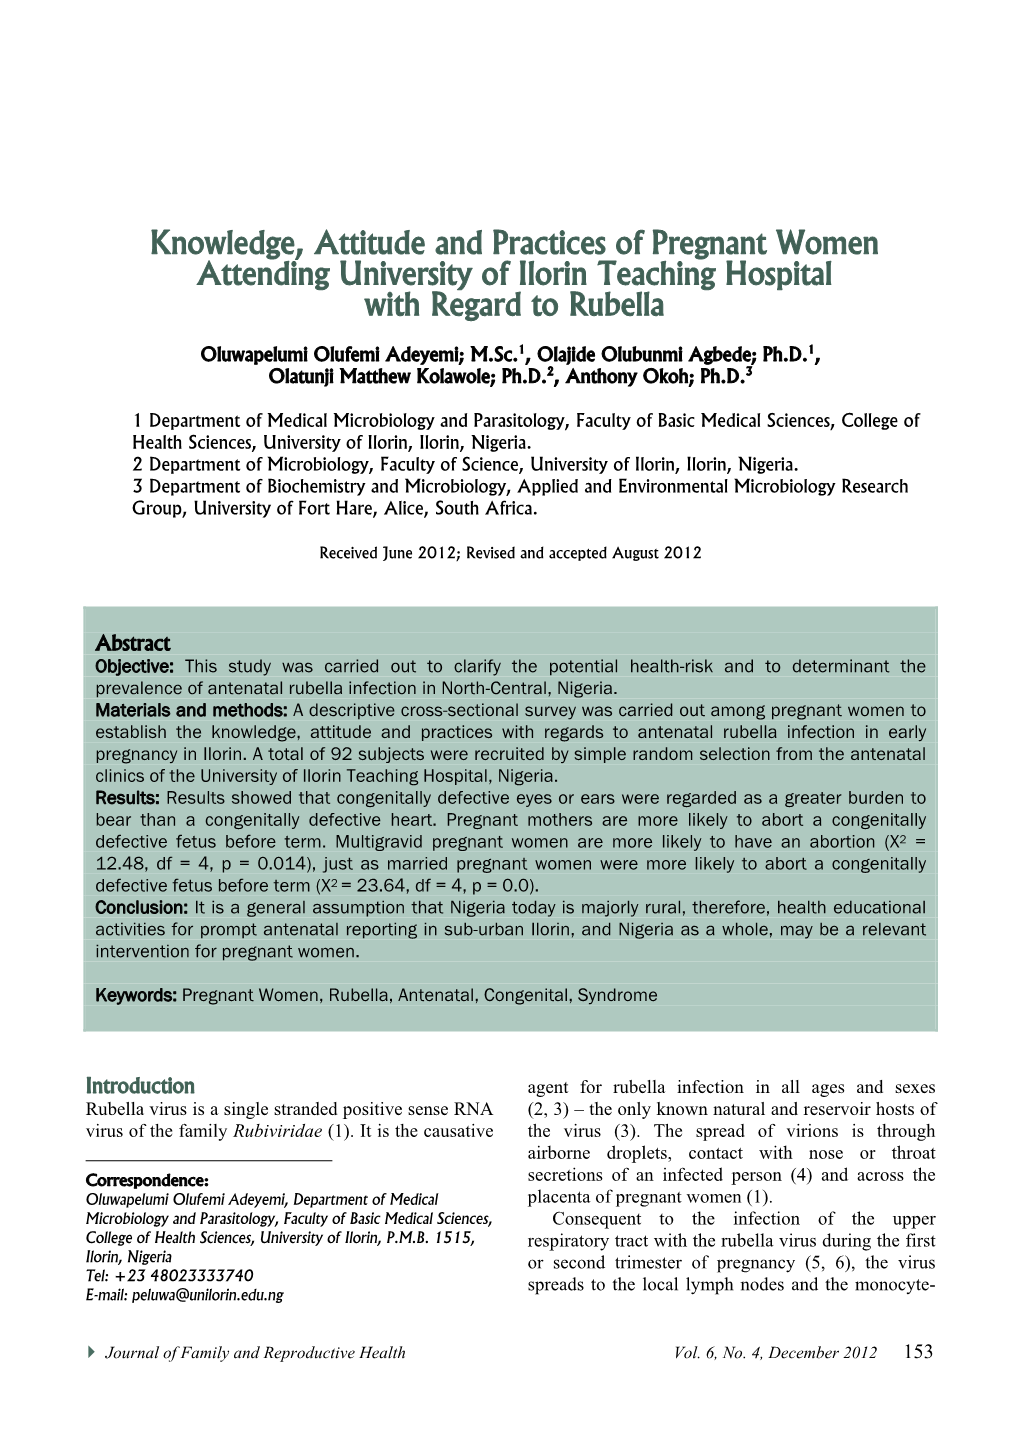 Knowledge, Attitude and Practices of Pregnant Women Attending University of Ilorin Teaching Hospital with Regard to Rubella